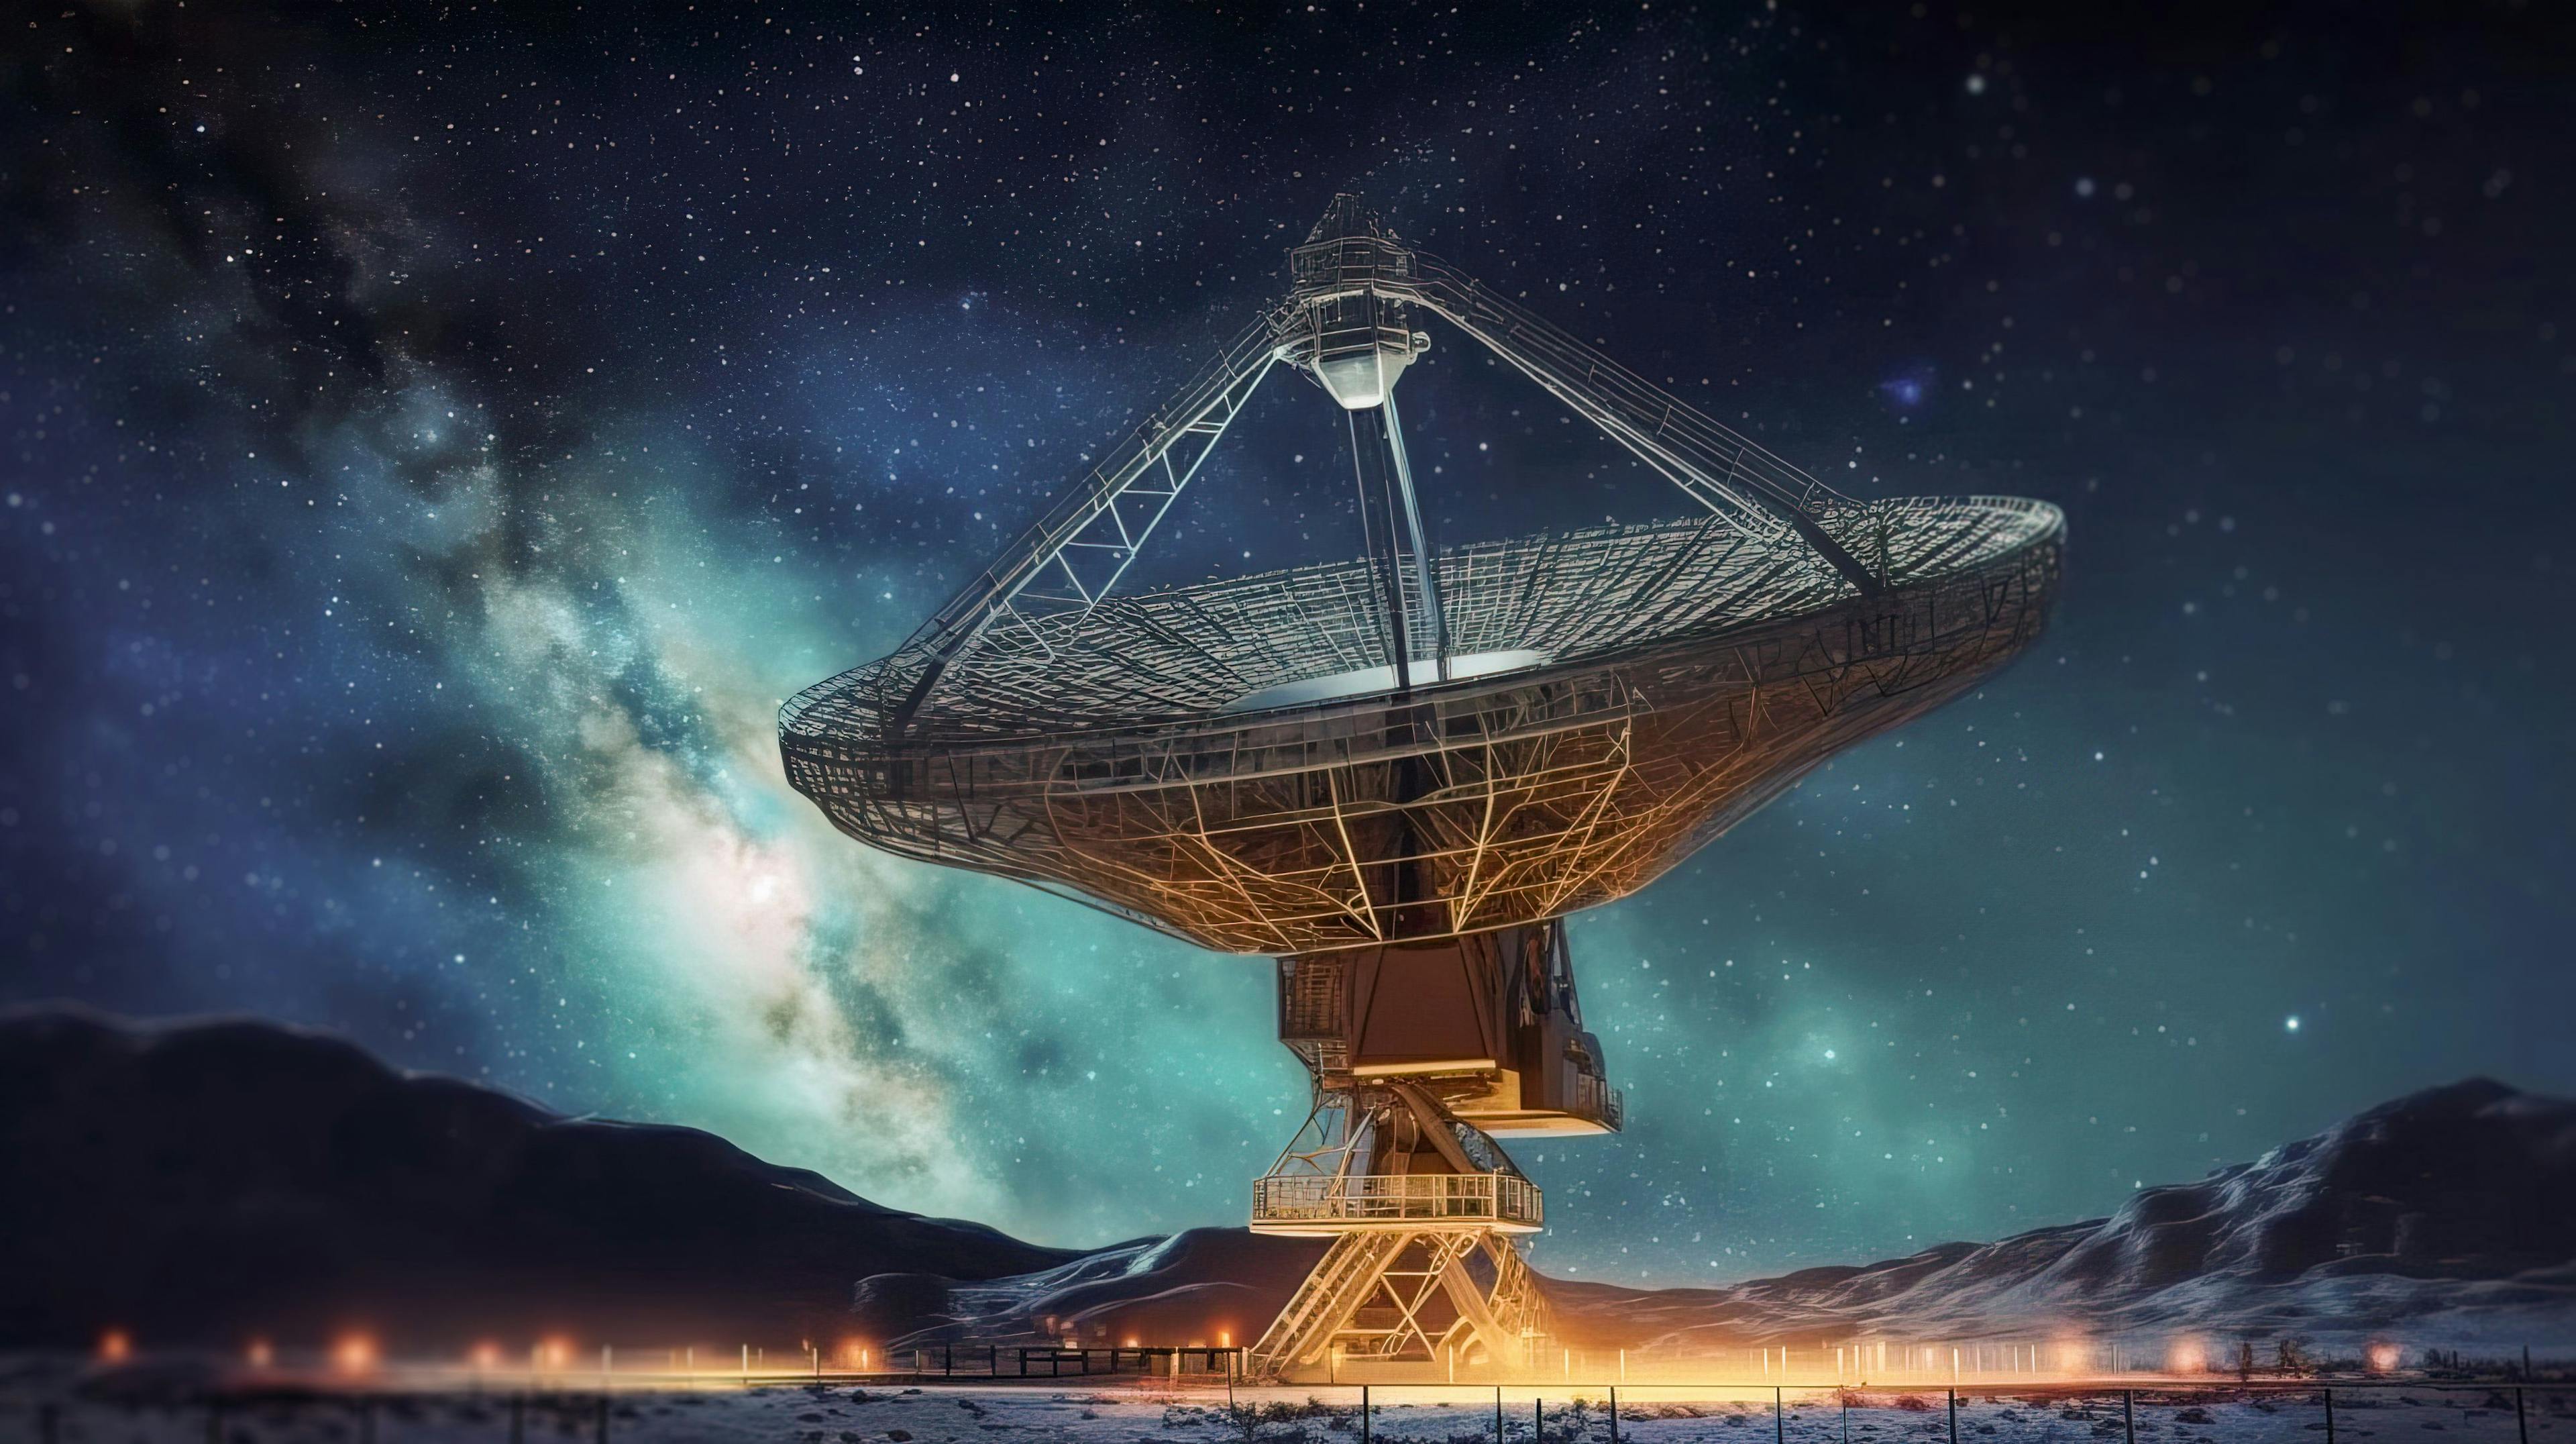 Big telescope, a large satellite dish against the night sky tracks the stars. Technology concept, search for extraterrestrial life, wiretap of space. | Image Credit: © Falk - stock.adobe.com